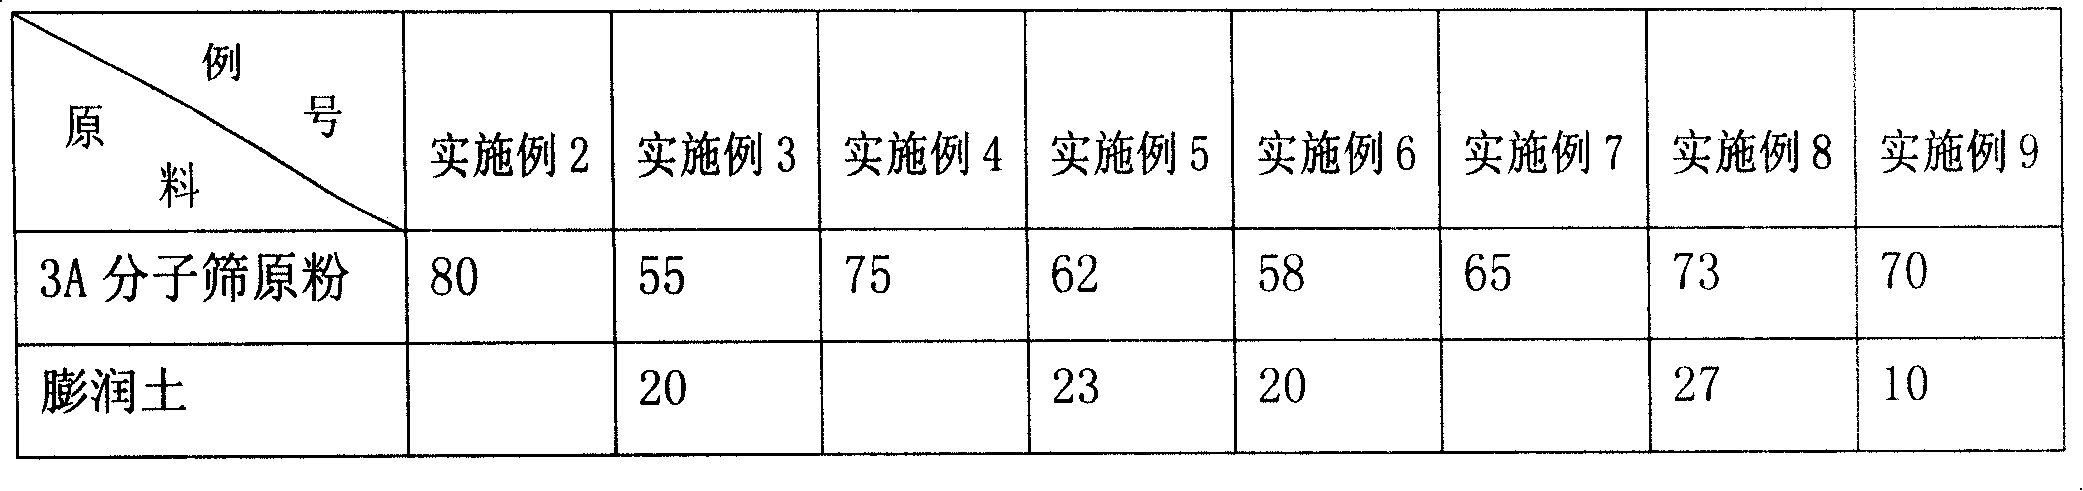 Hollow glass drying agent and method for producing the same